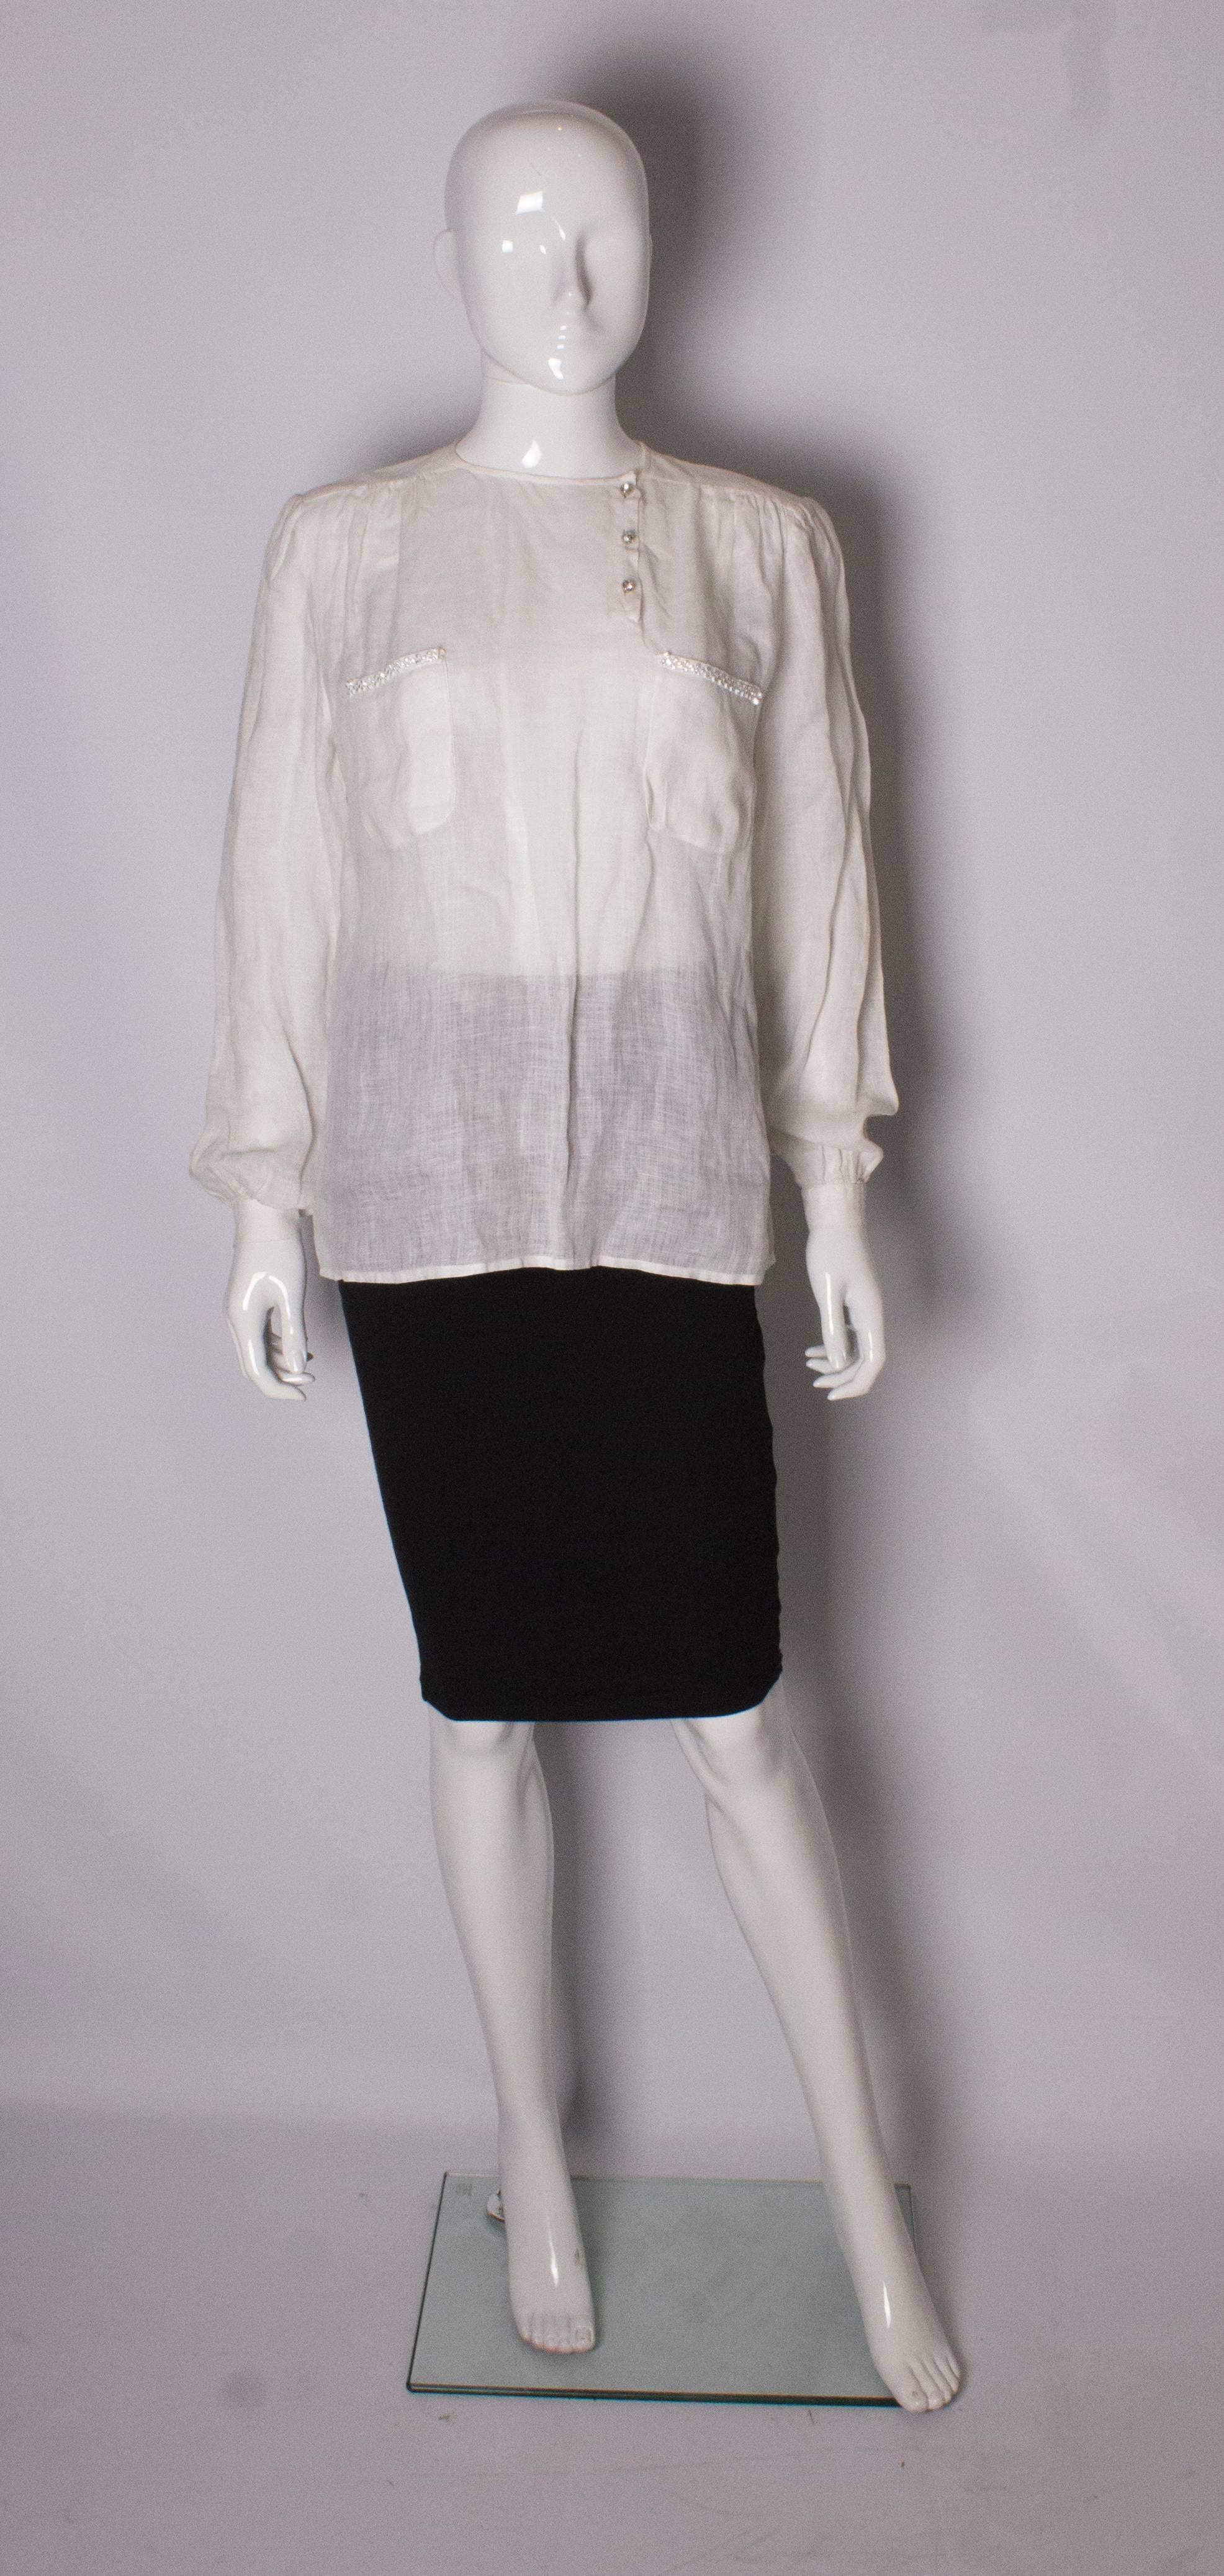 A white linen blouse by Valentino, Boutique line. The blouse has a round neckline, with off centre opening with three buttons. It has single button cuffs and 2 breast pockets with diamante decoration. It is worn loose and can fit bust up to 40''